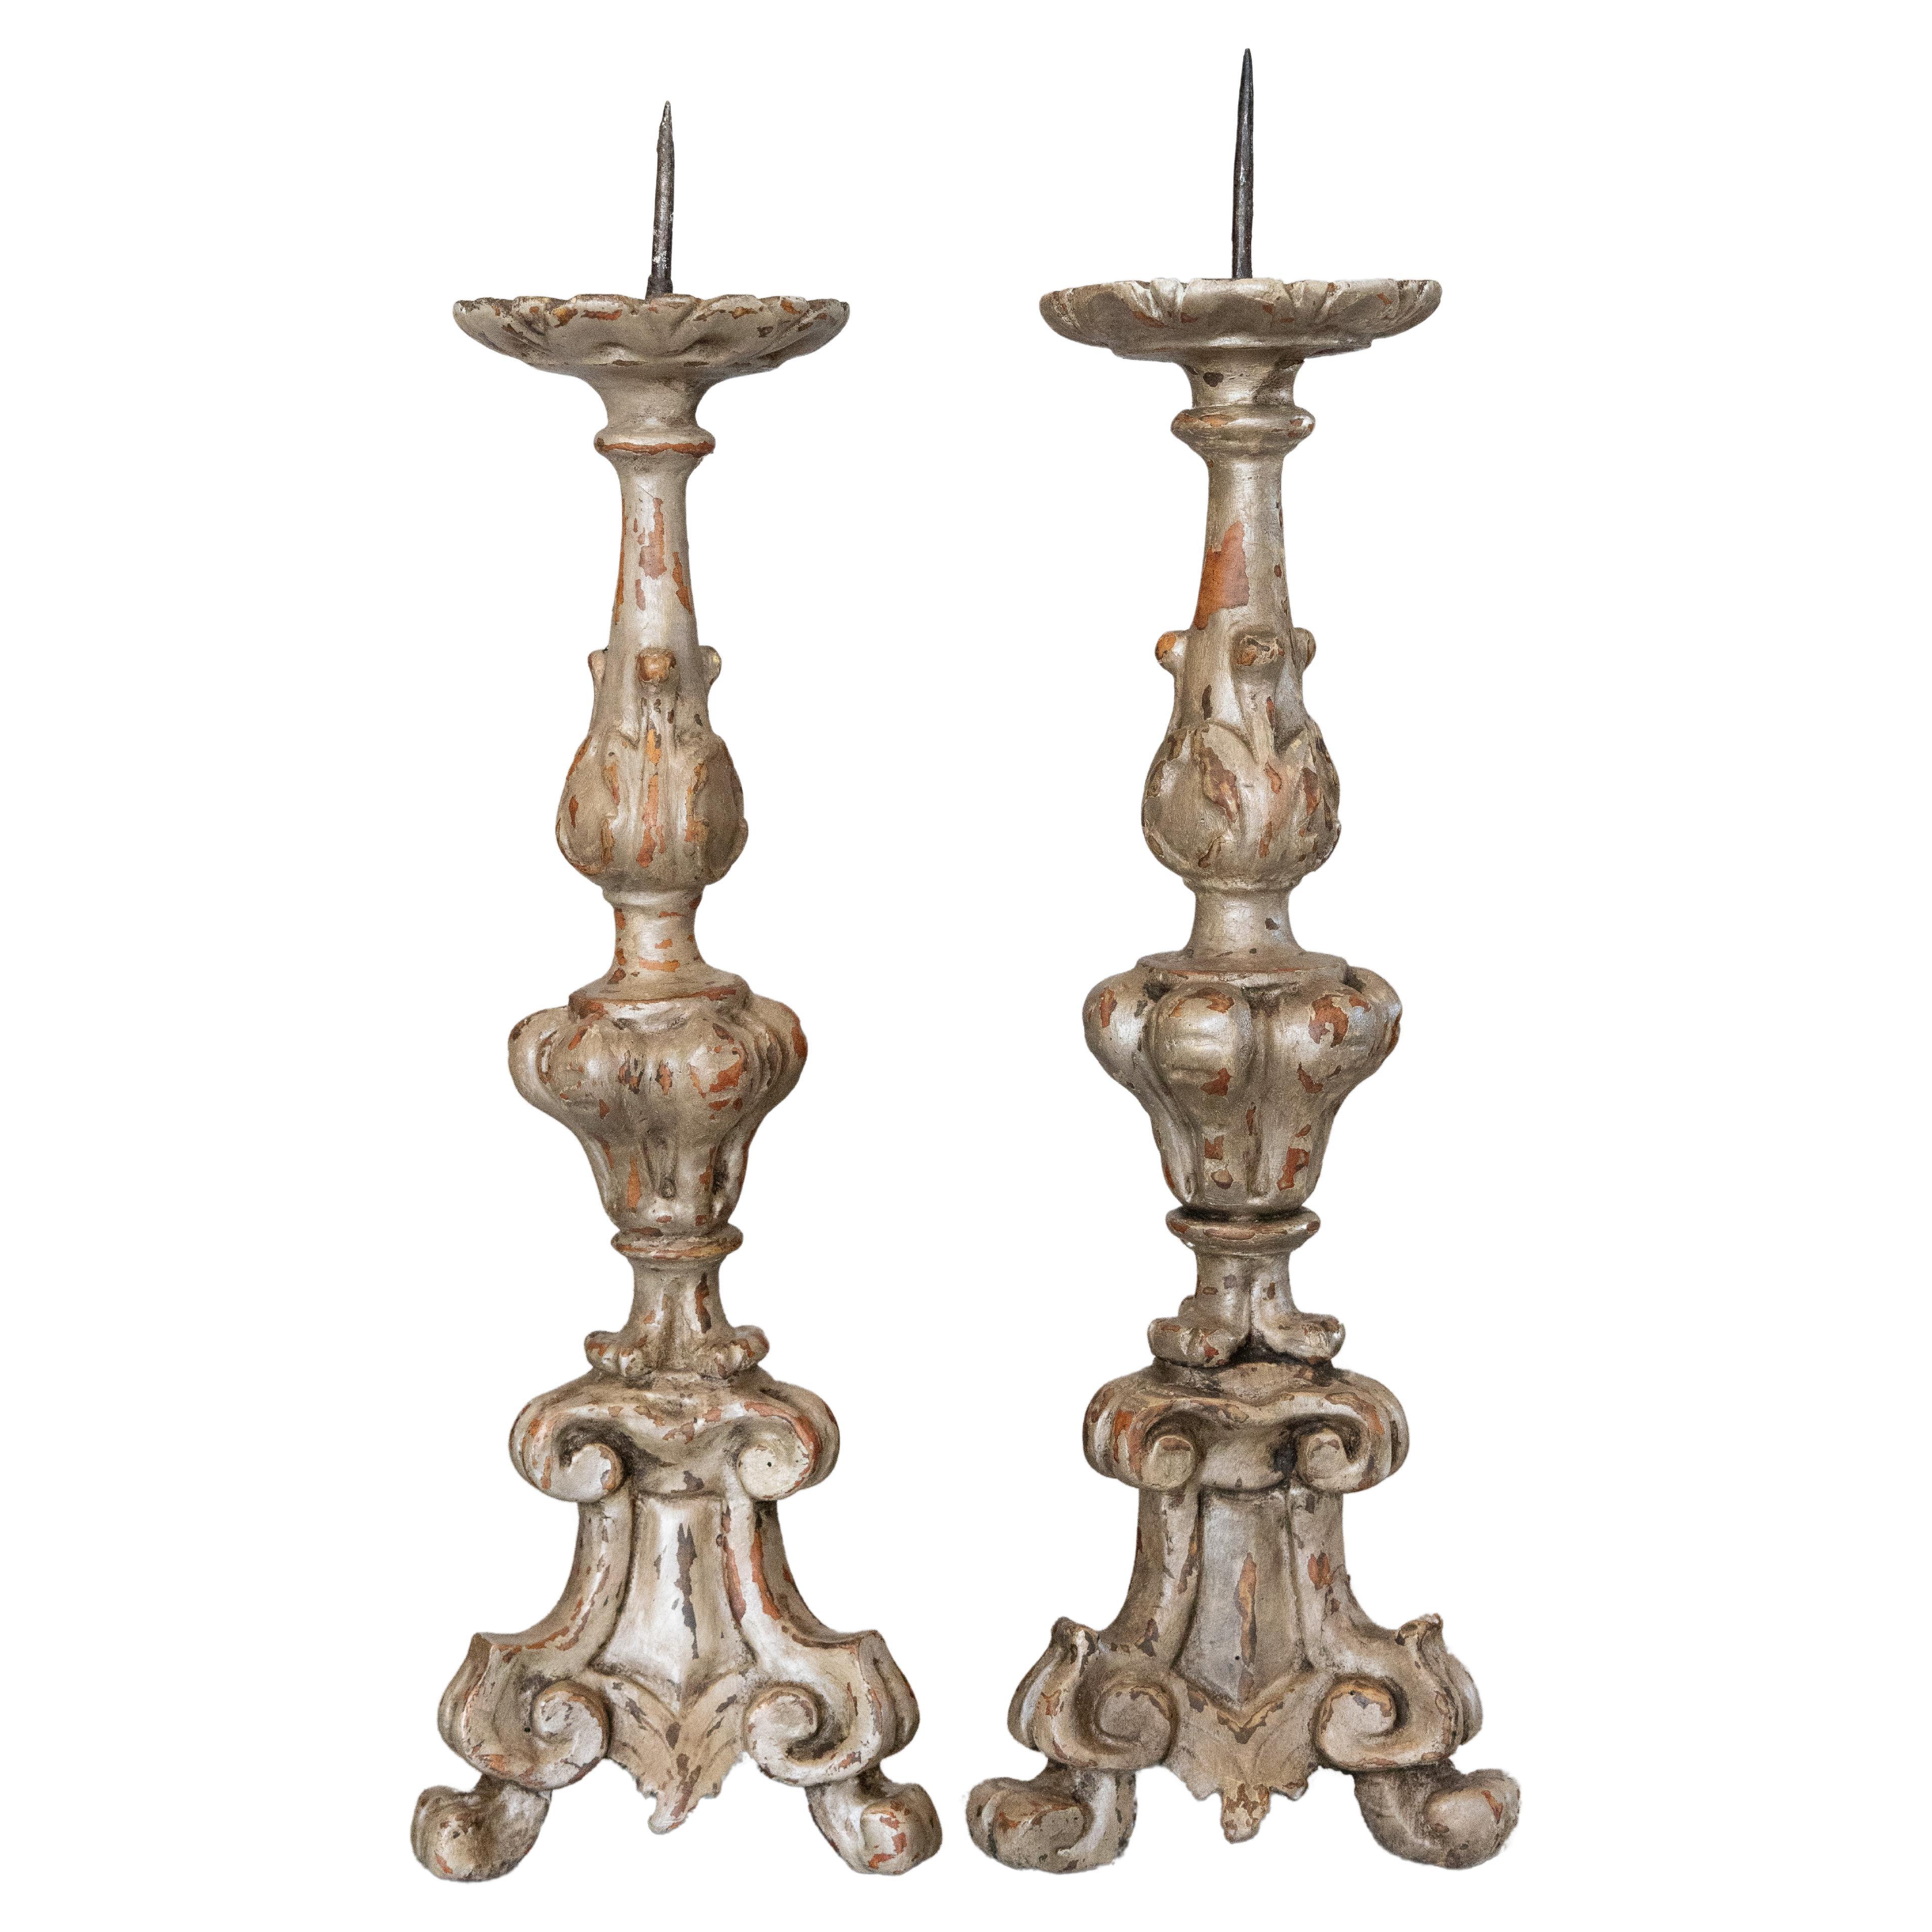 Pair of 18th Century Italian Silver Gilt Wood Pricket Candlesticks For Sale